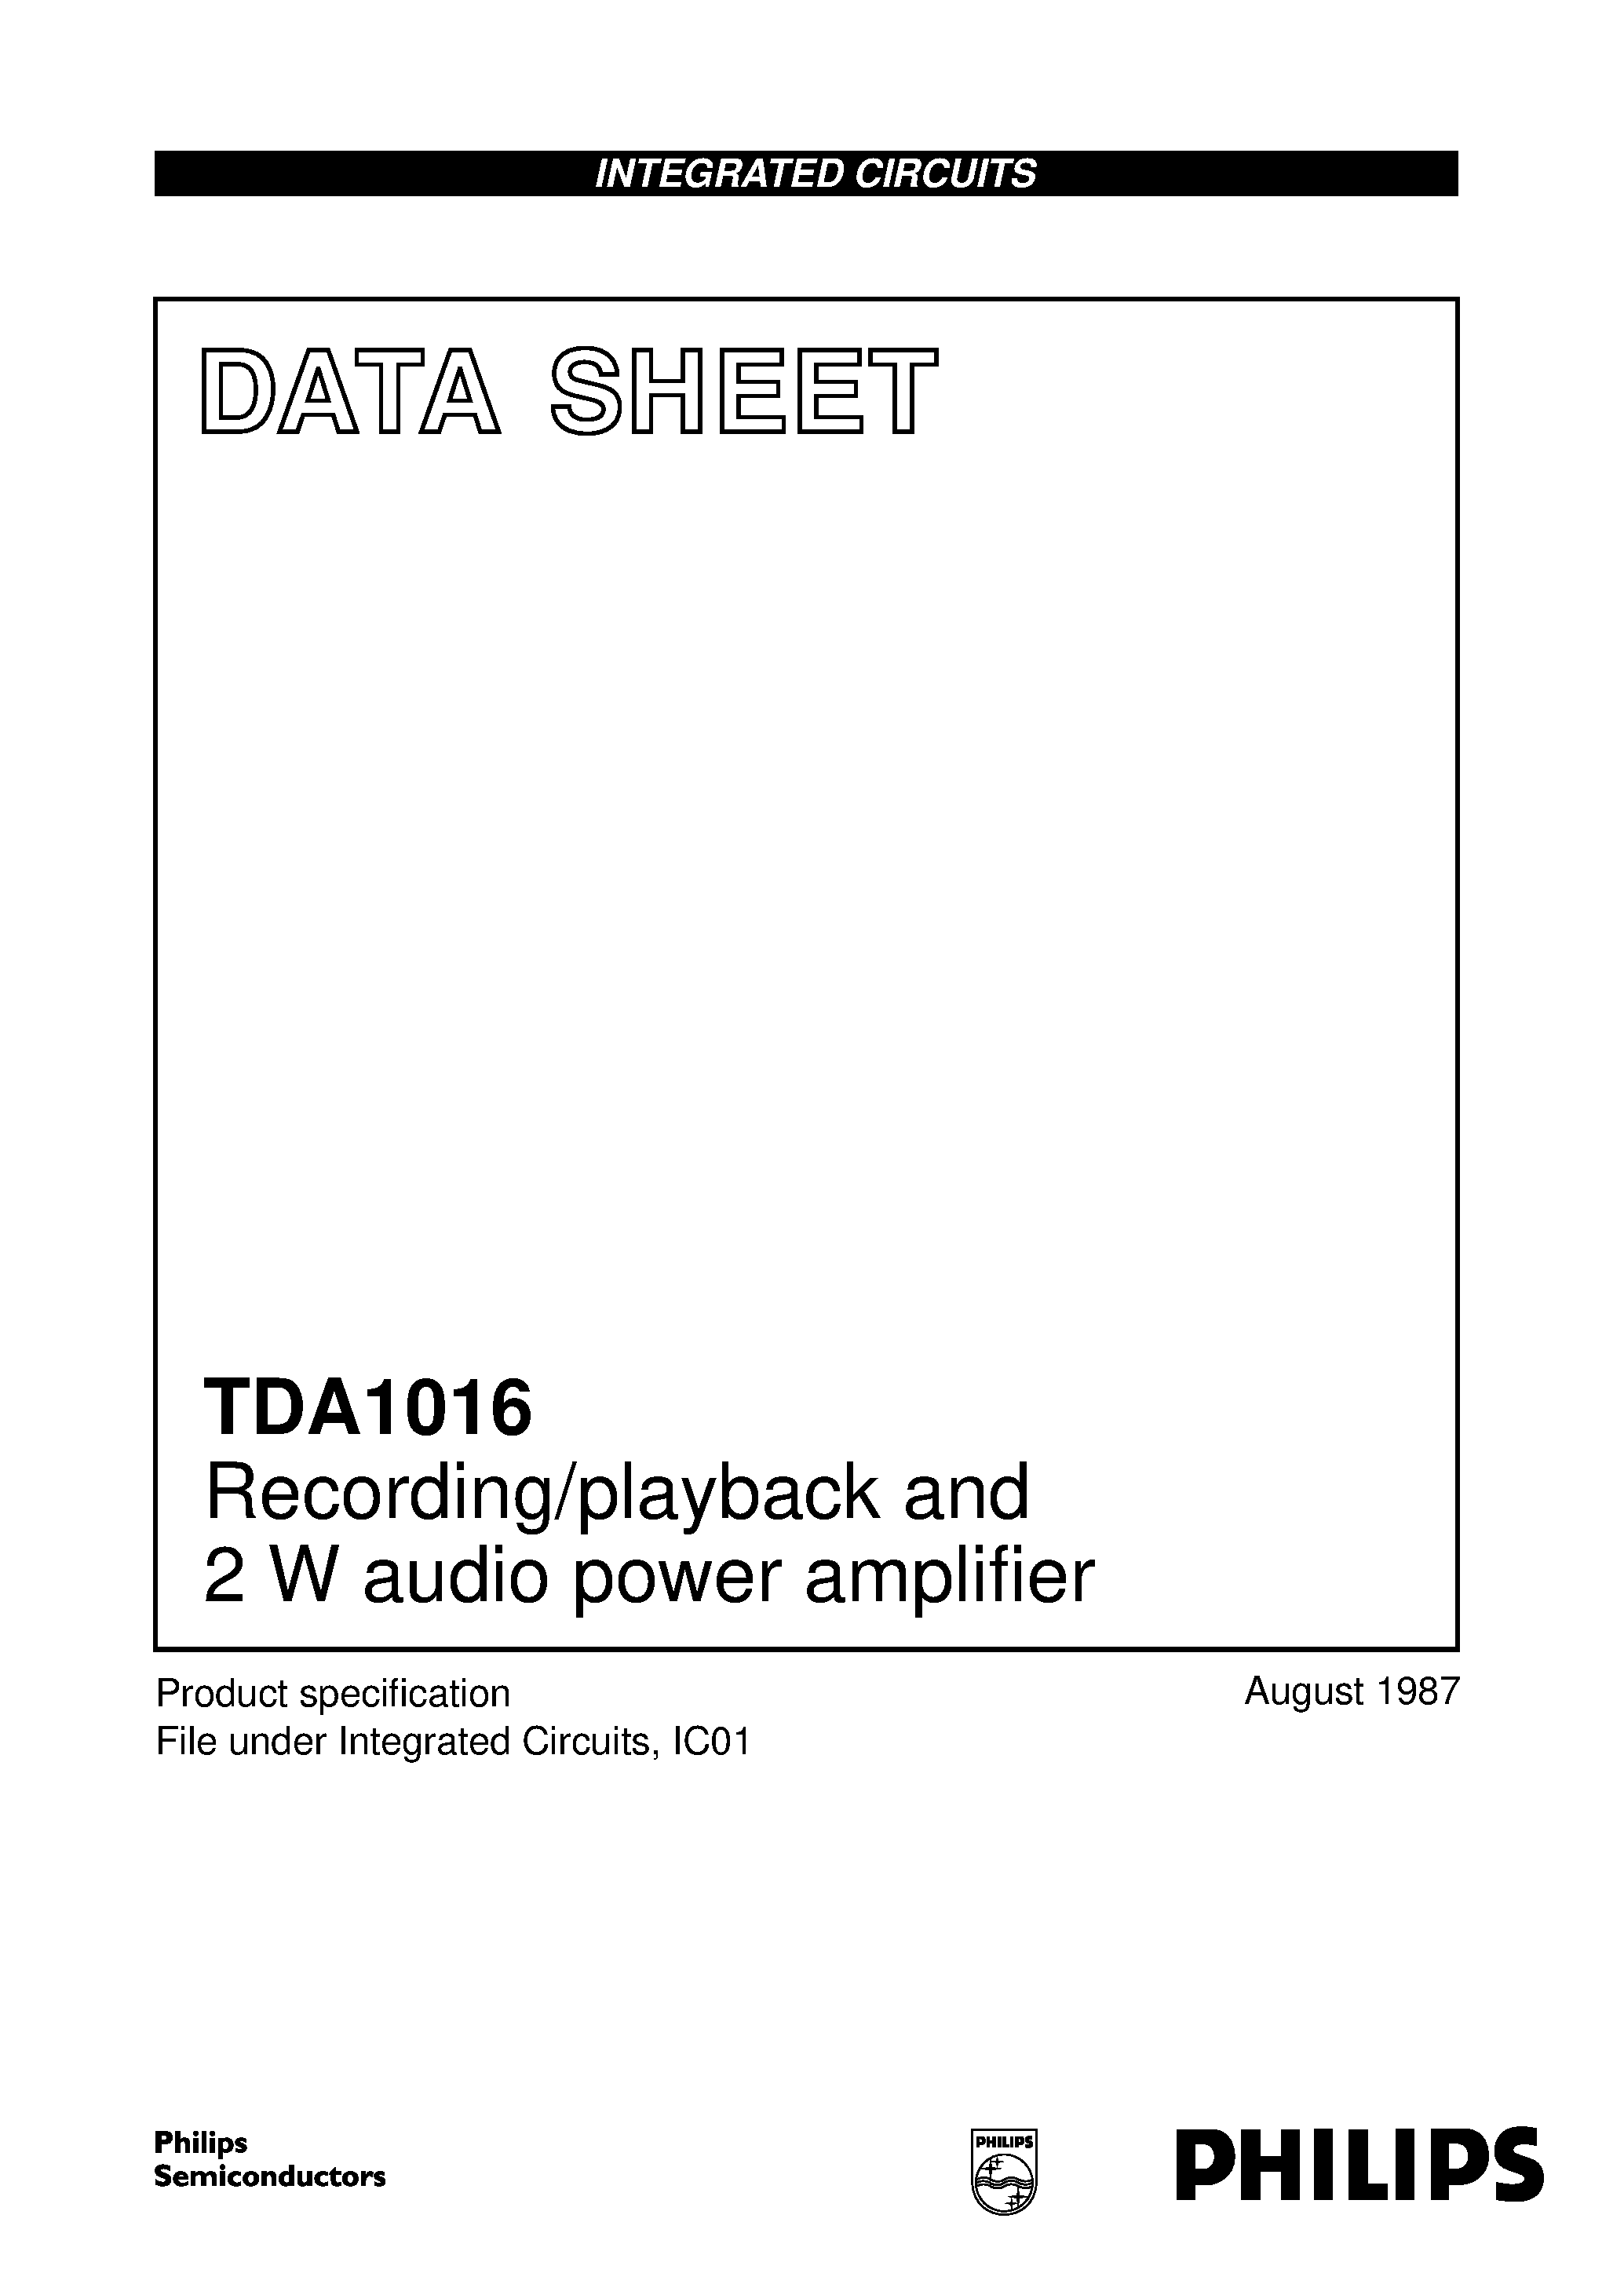 Даташит TDA1016 - Recording/playback and 2 W audio power amplifier страница 1